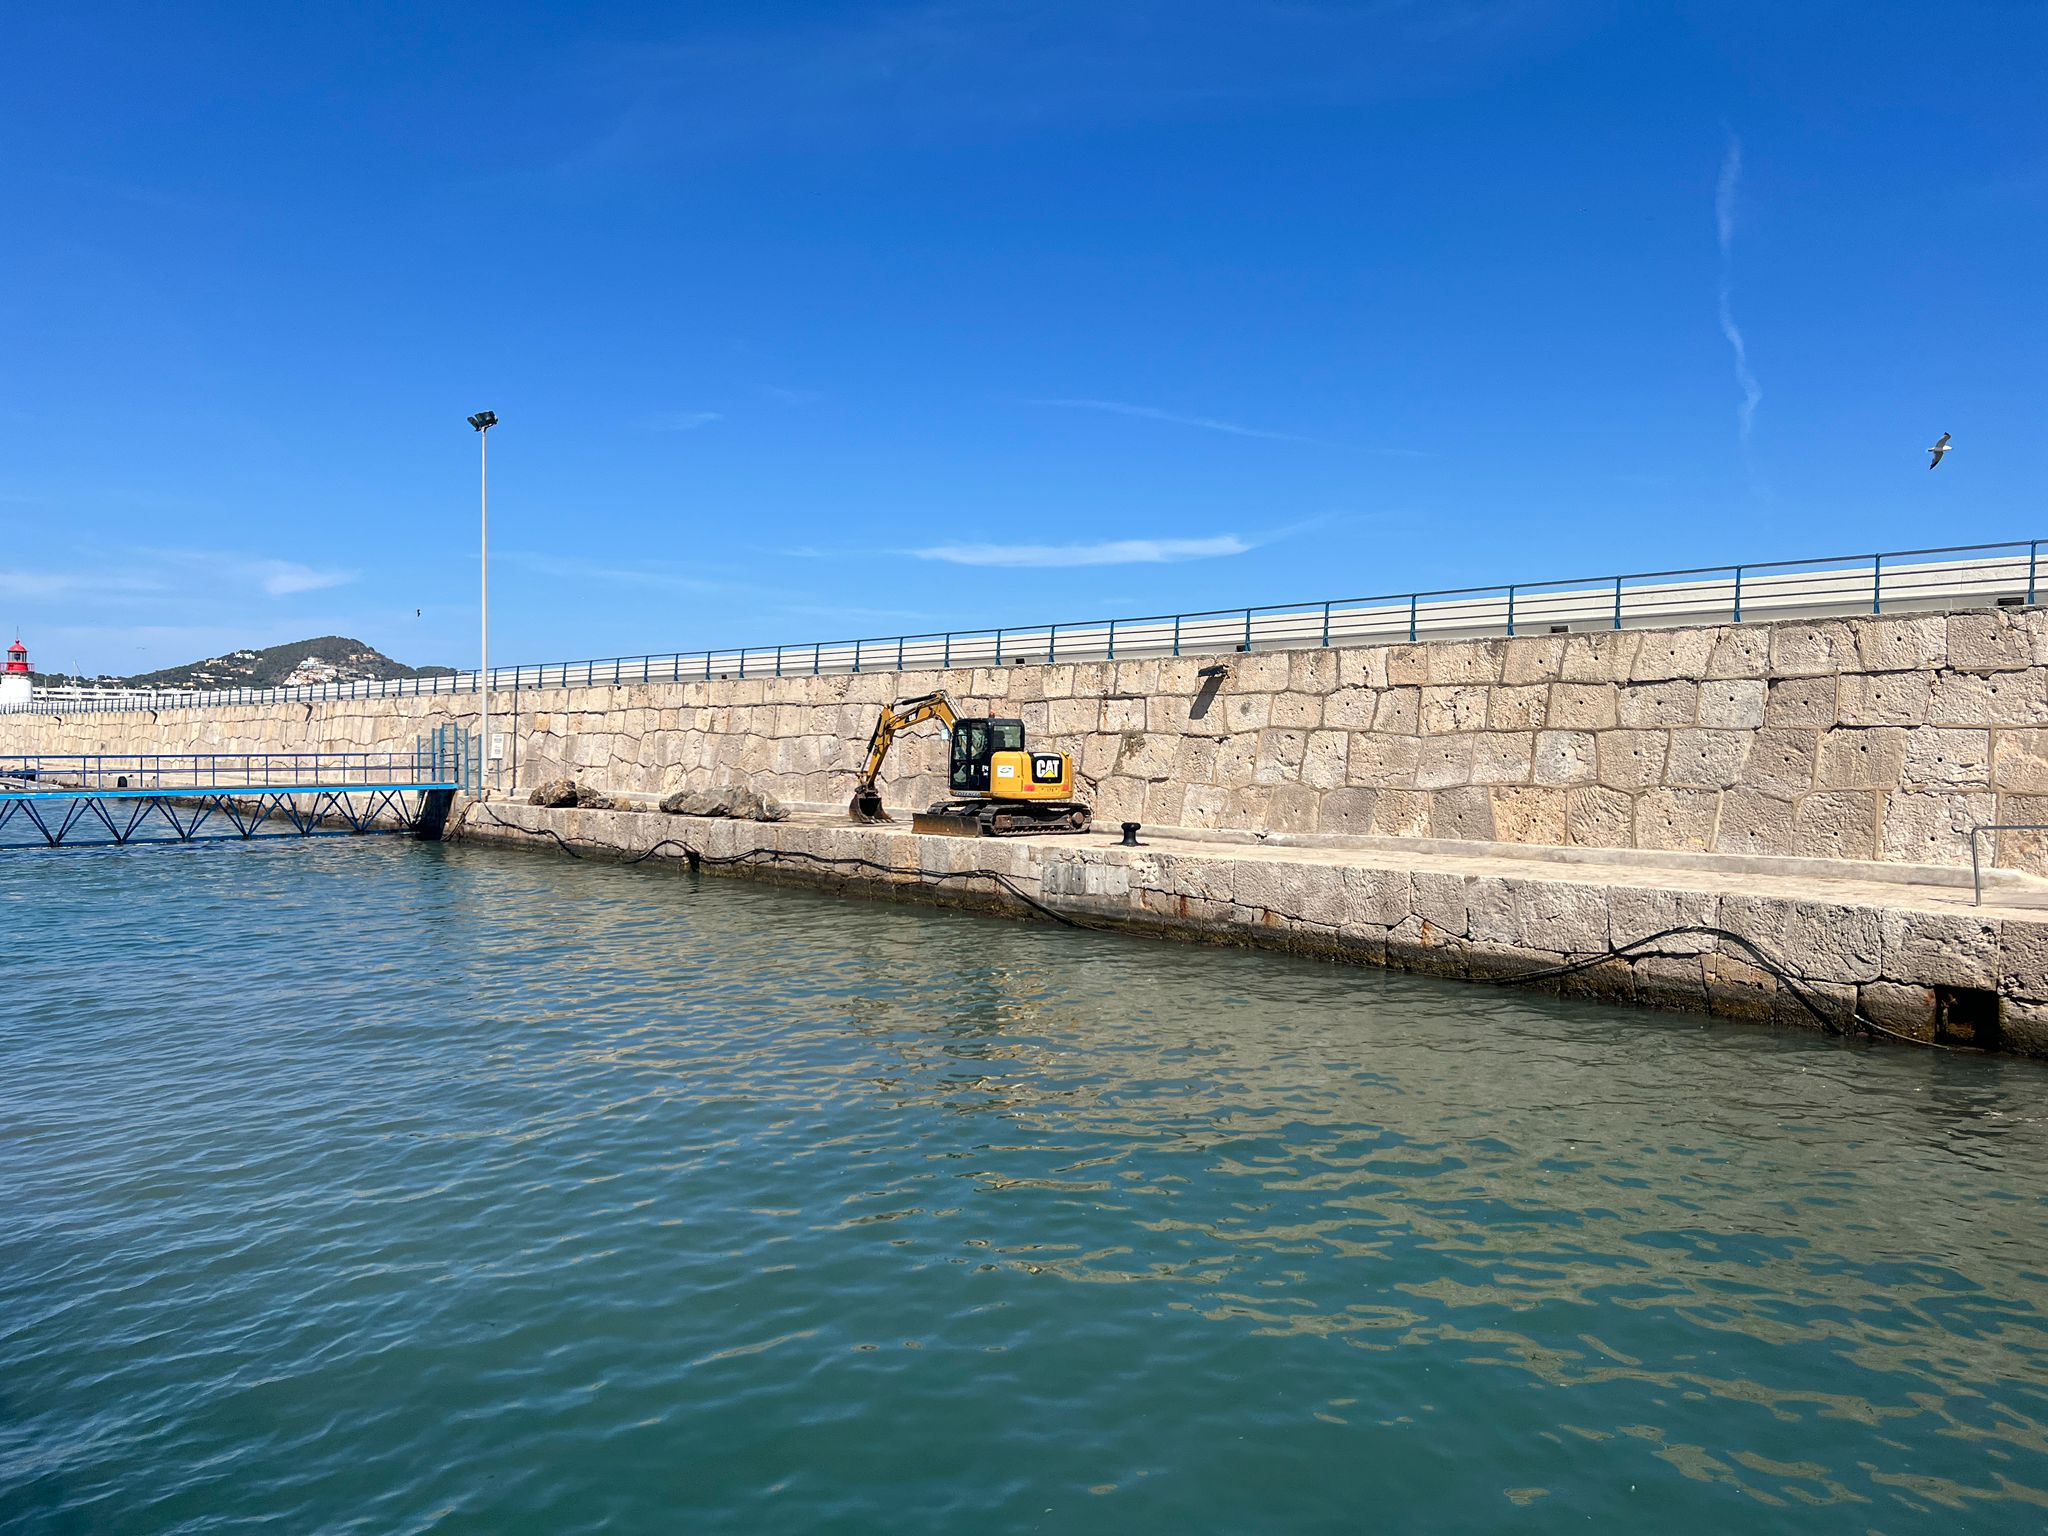 The APB improves the Port of Eivissa’s breakwater for mooring boats during weather warnings